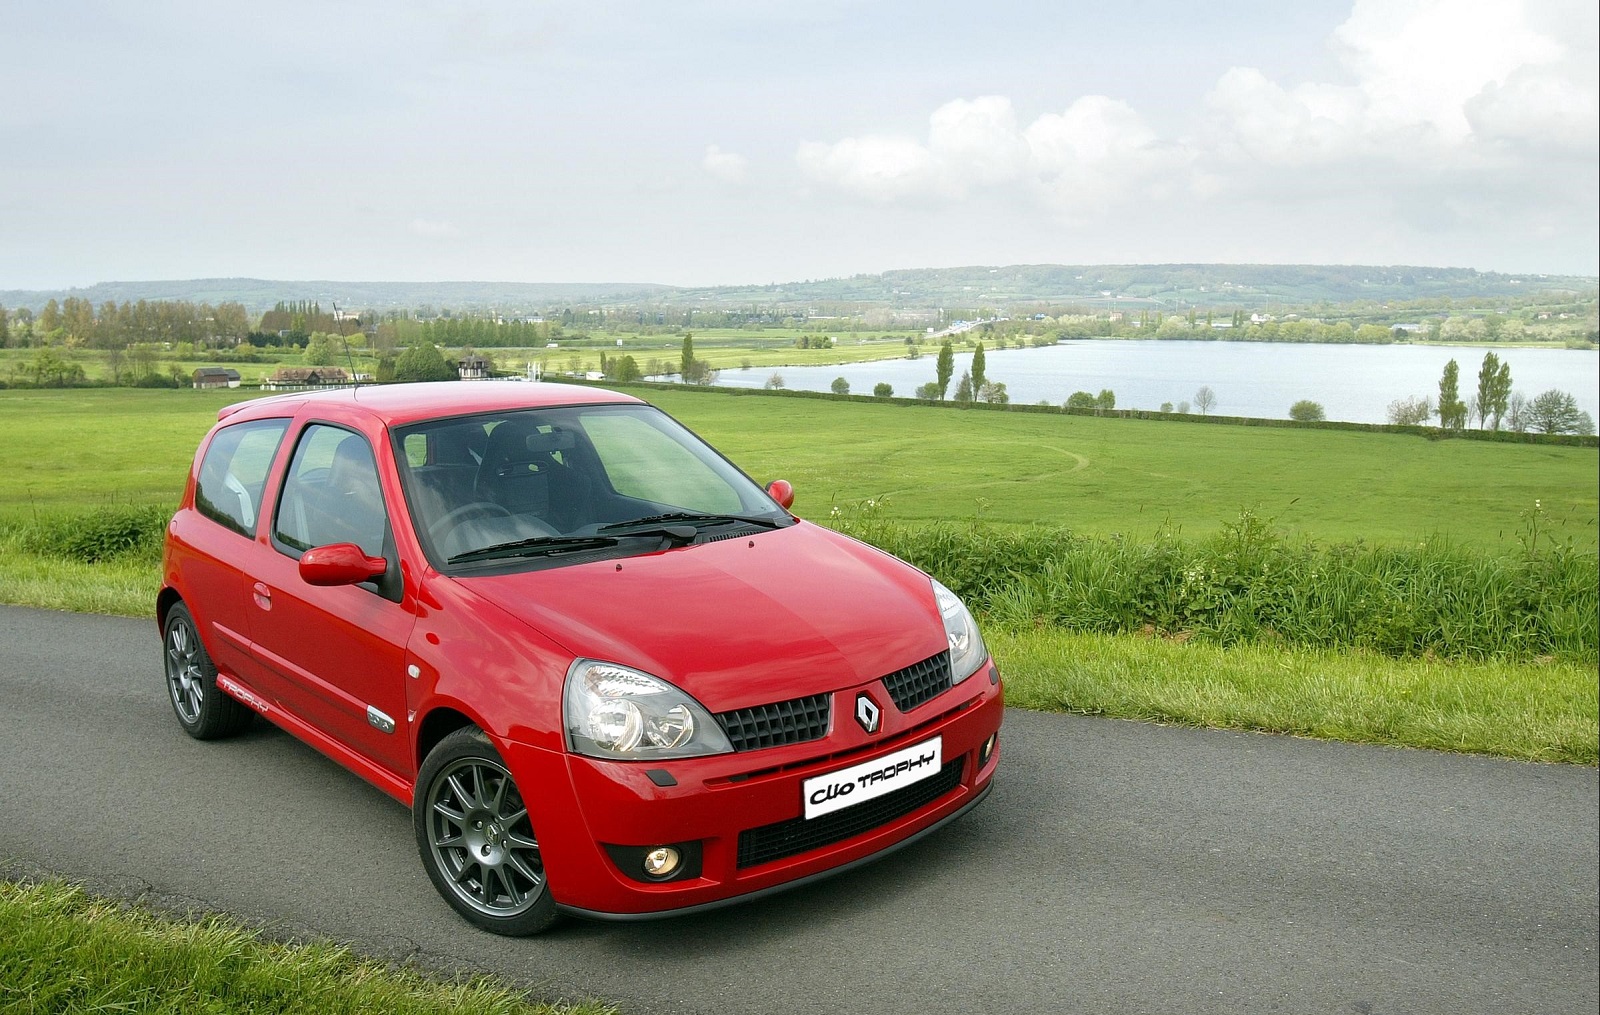 <p>More than 16 million Clios have found homes. It’s been a huge hit for Renault and the Clio is a <strong>global success story</strong> thanks to various different versions being sold in different markets. That worldwide appeal is what pushes this supermini into the upper reaches of car sales. A fifth generation arrived in 2019. Renault declares it the <strong>best-selling French car of all time</strong>.</p>